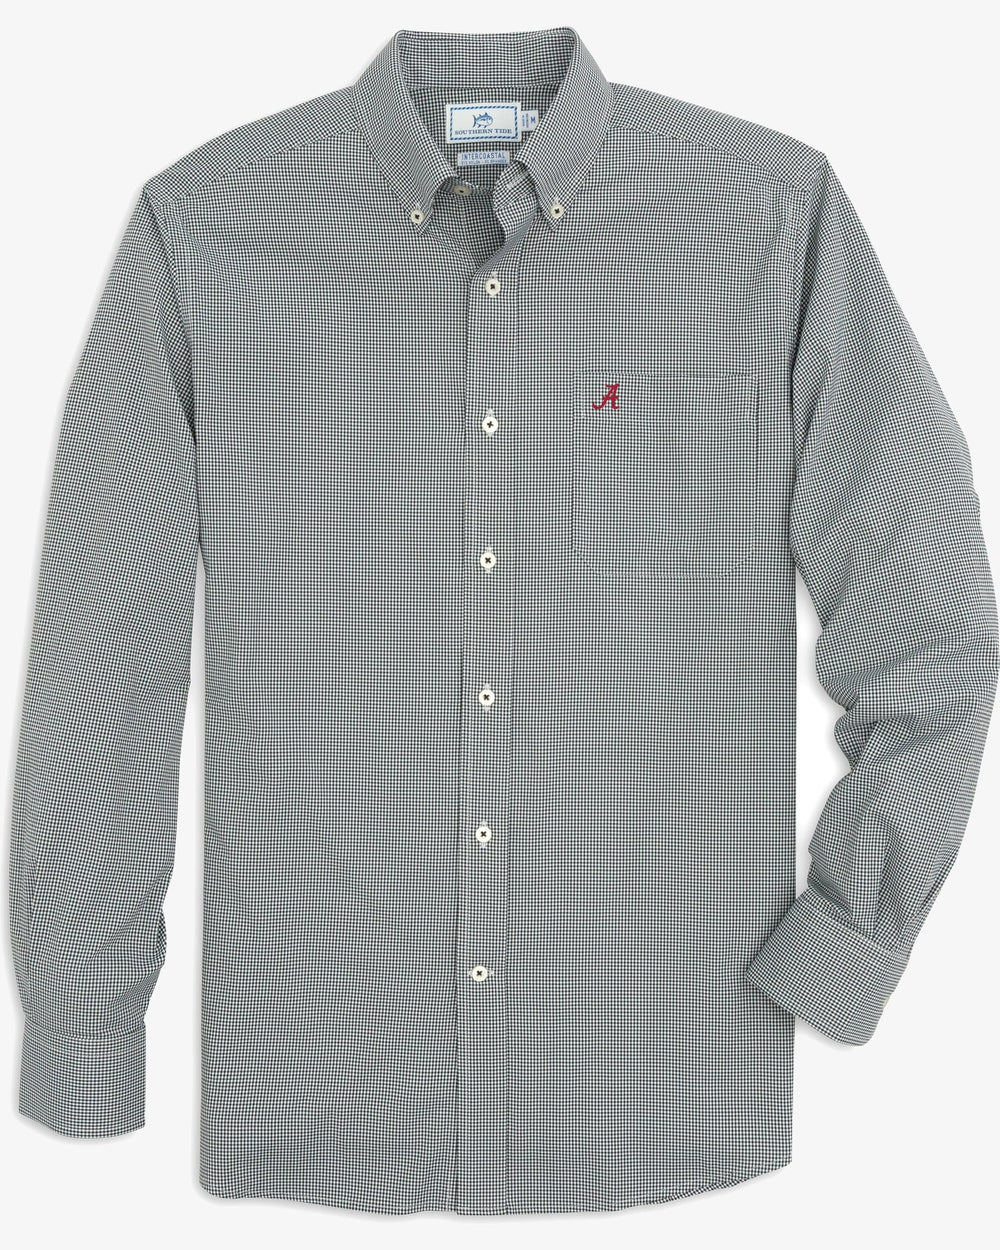 The front view of the Alabama Crimson Tide Gingham Button Down Shirt  by Southern Tide - Black